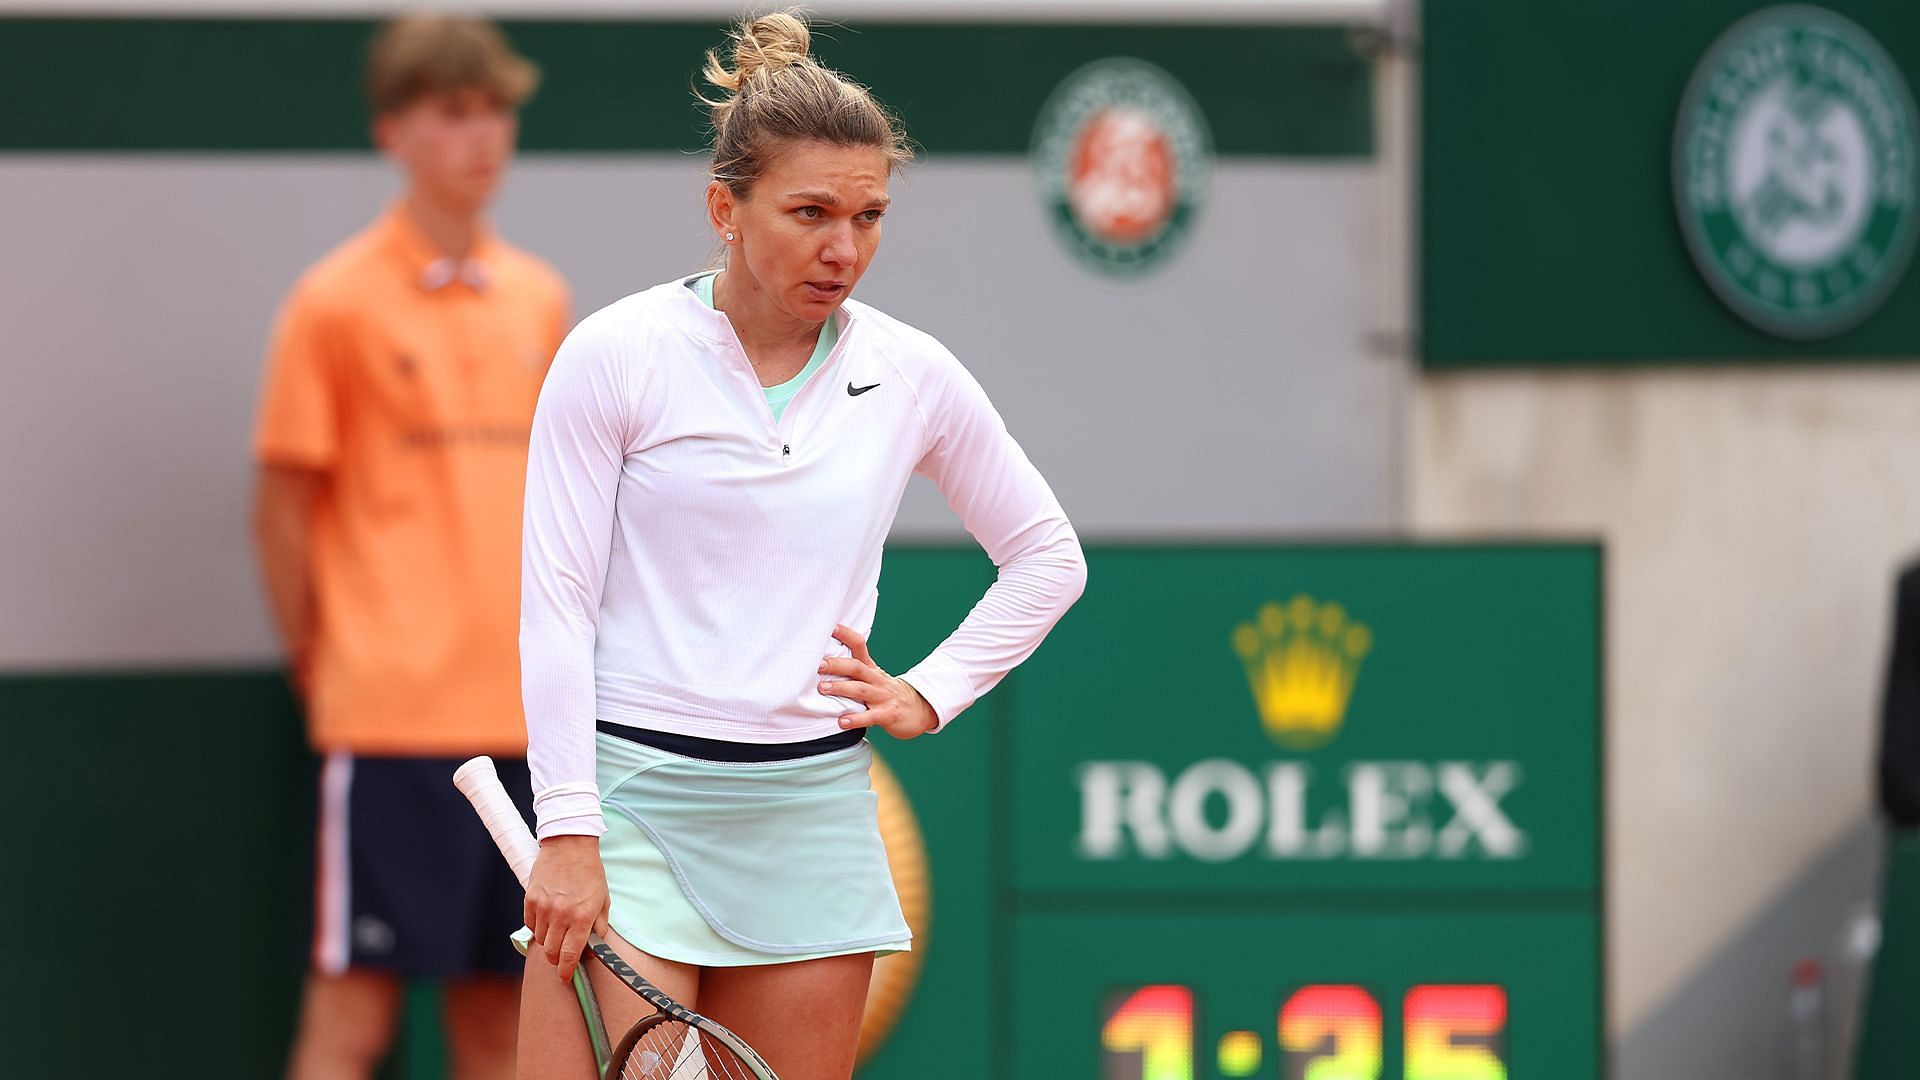 Simona Halep pictured at a tennis tournament